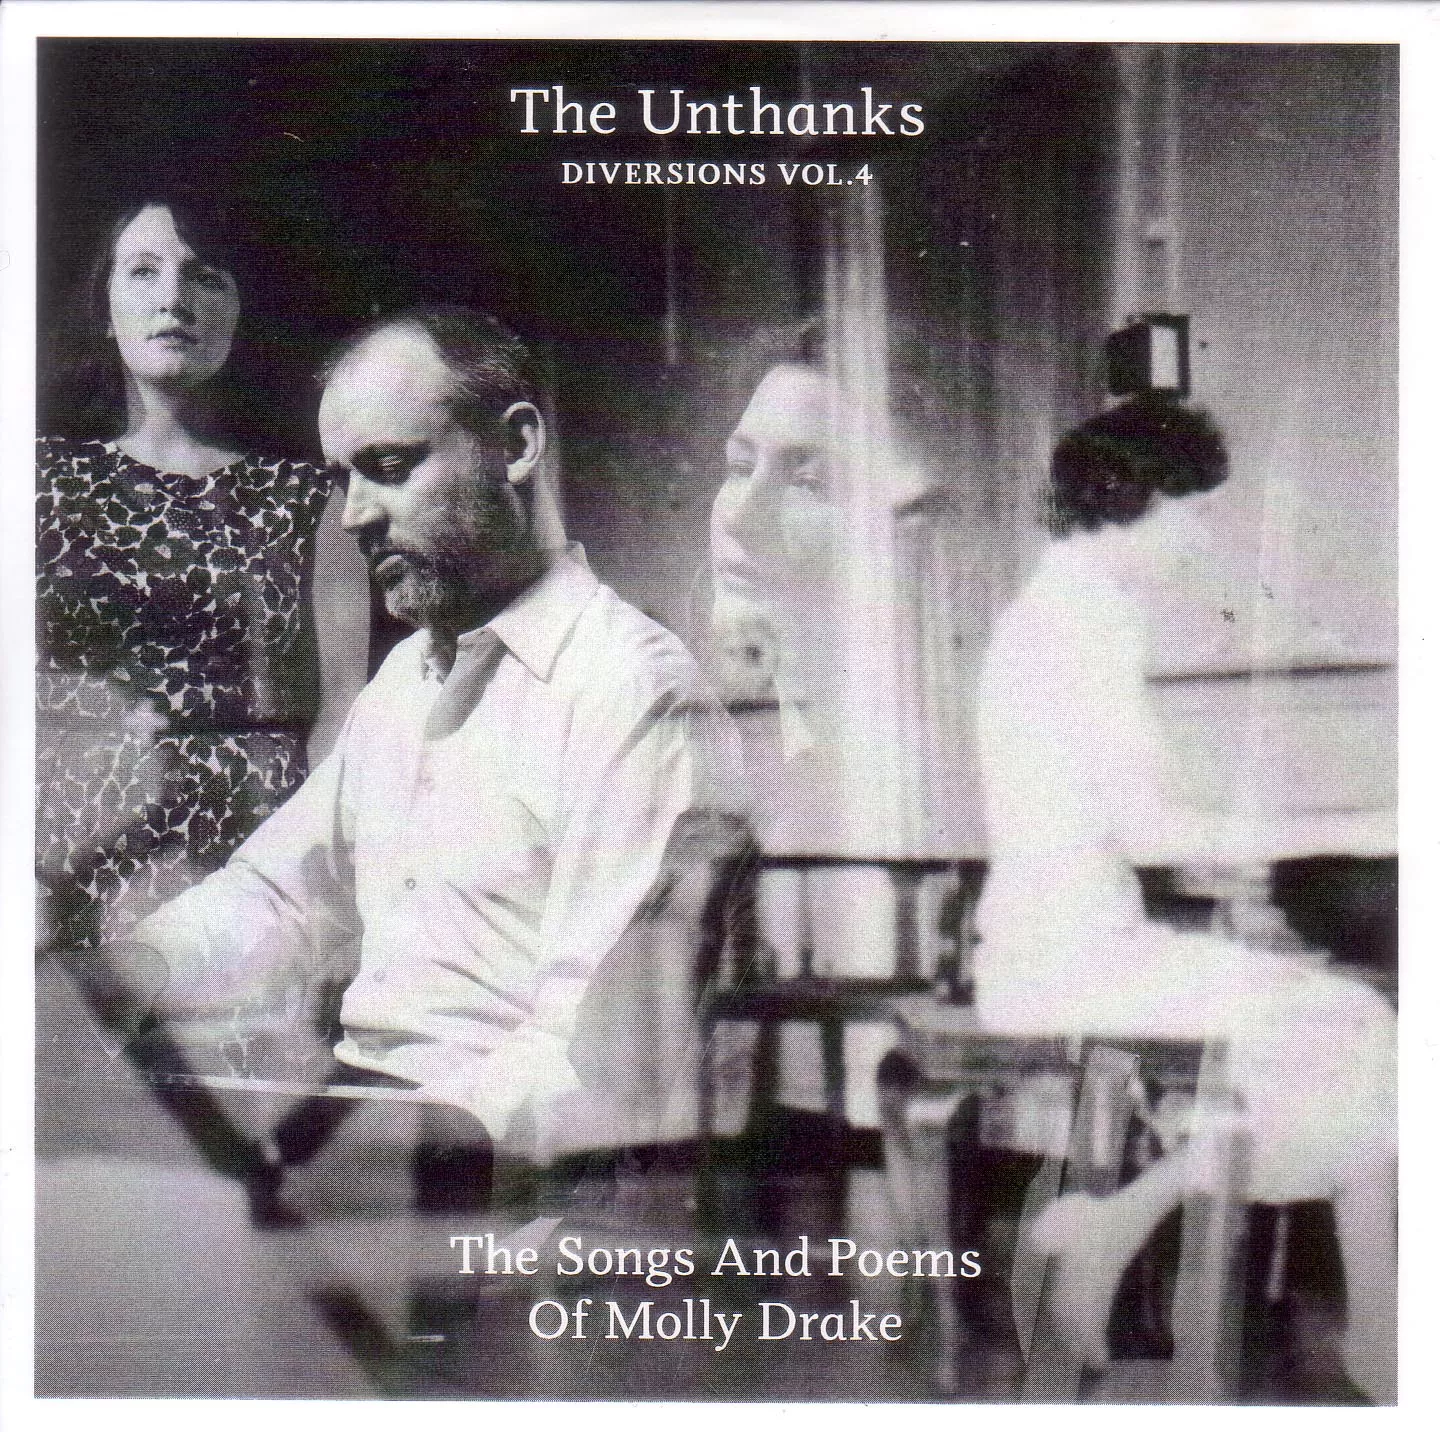 Diversions Vol. 4 - The Songs And Poems Of Molly Drake - The Unthanks